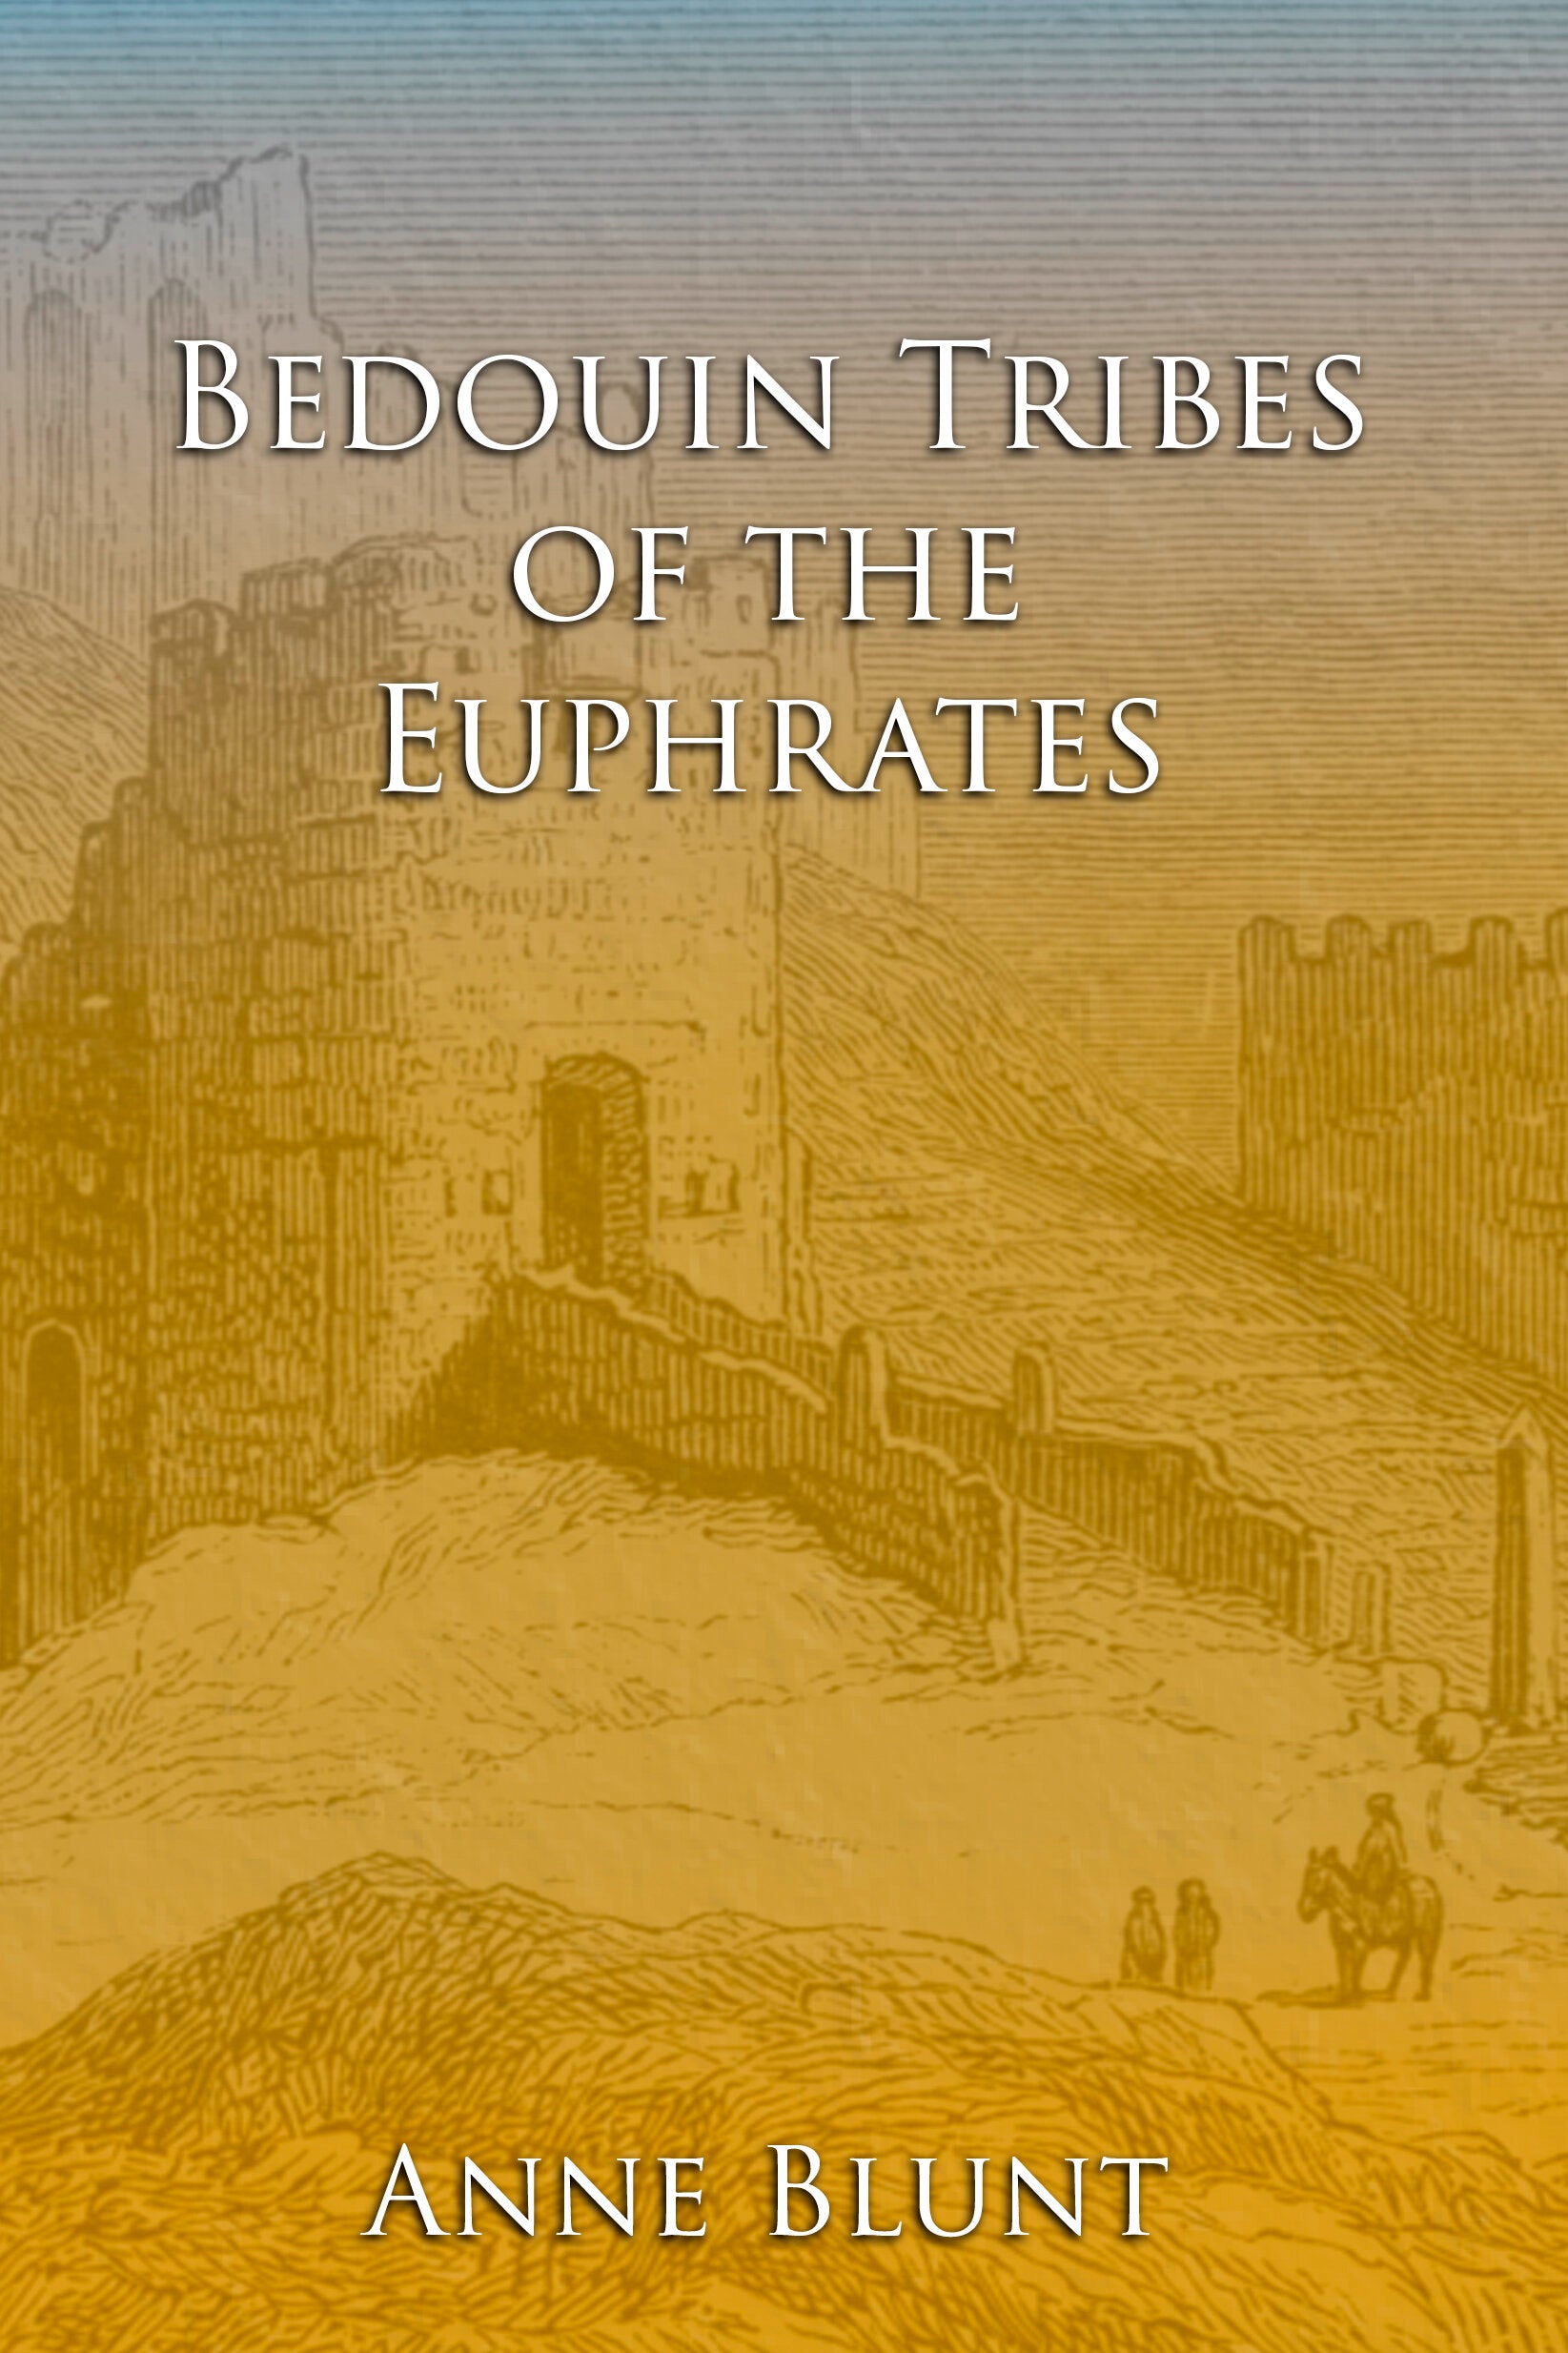 Bedouin Tribes of The Euphrates